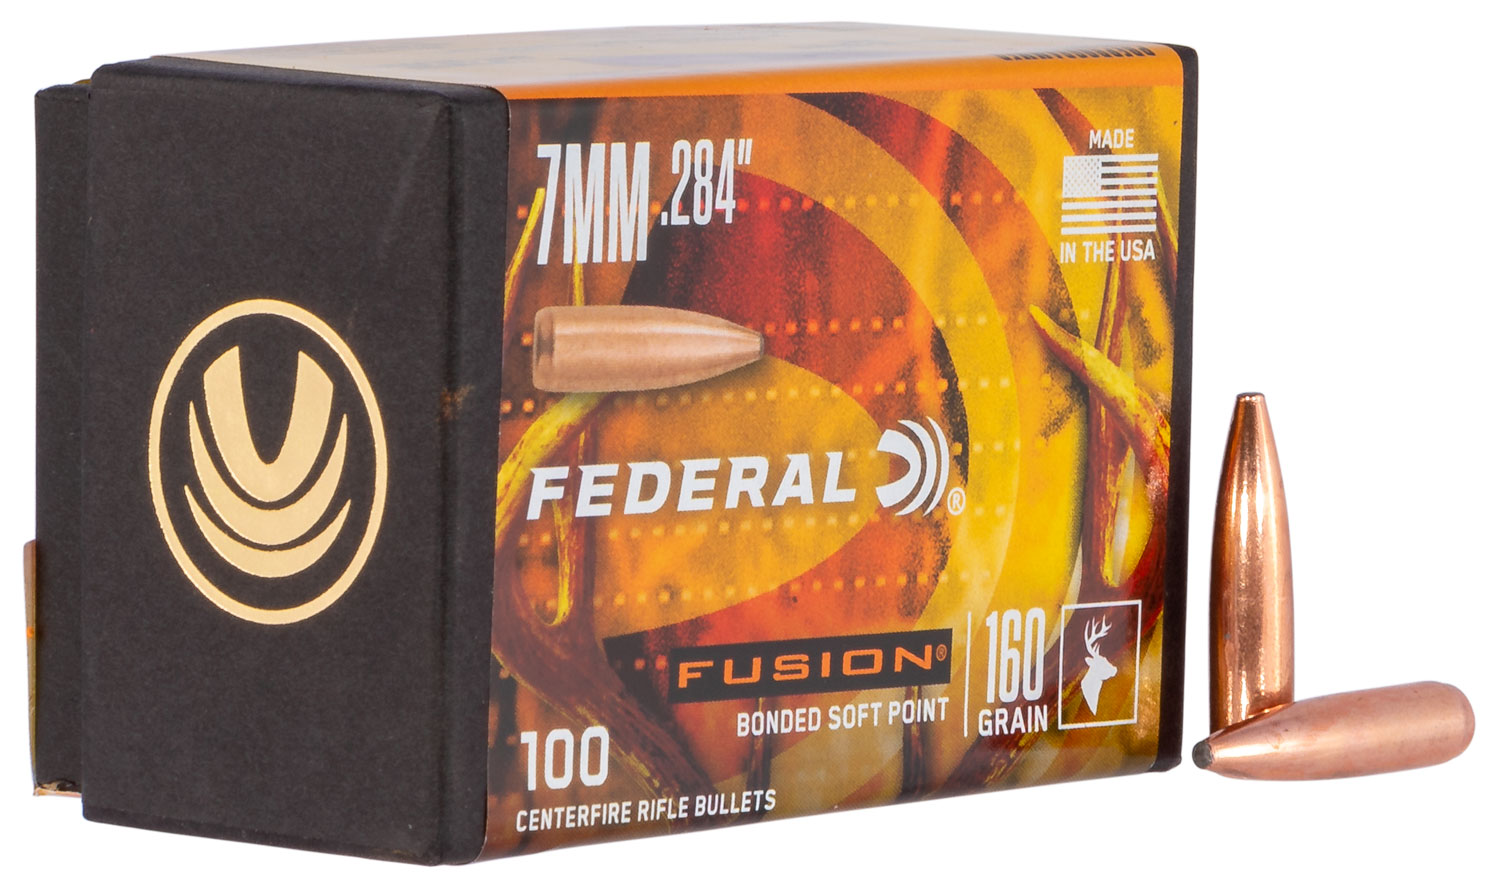 Federal FB284F3 Fusion Component  7mm .284 160 gr Fusion Soft Point